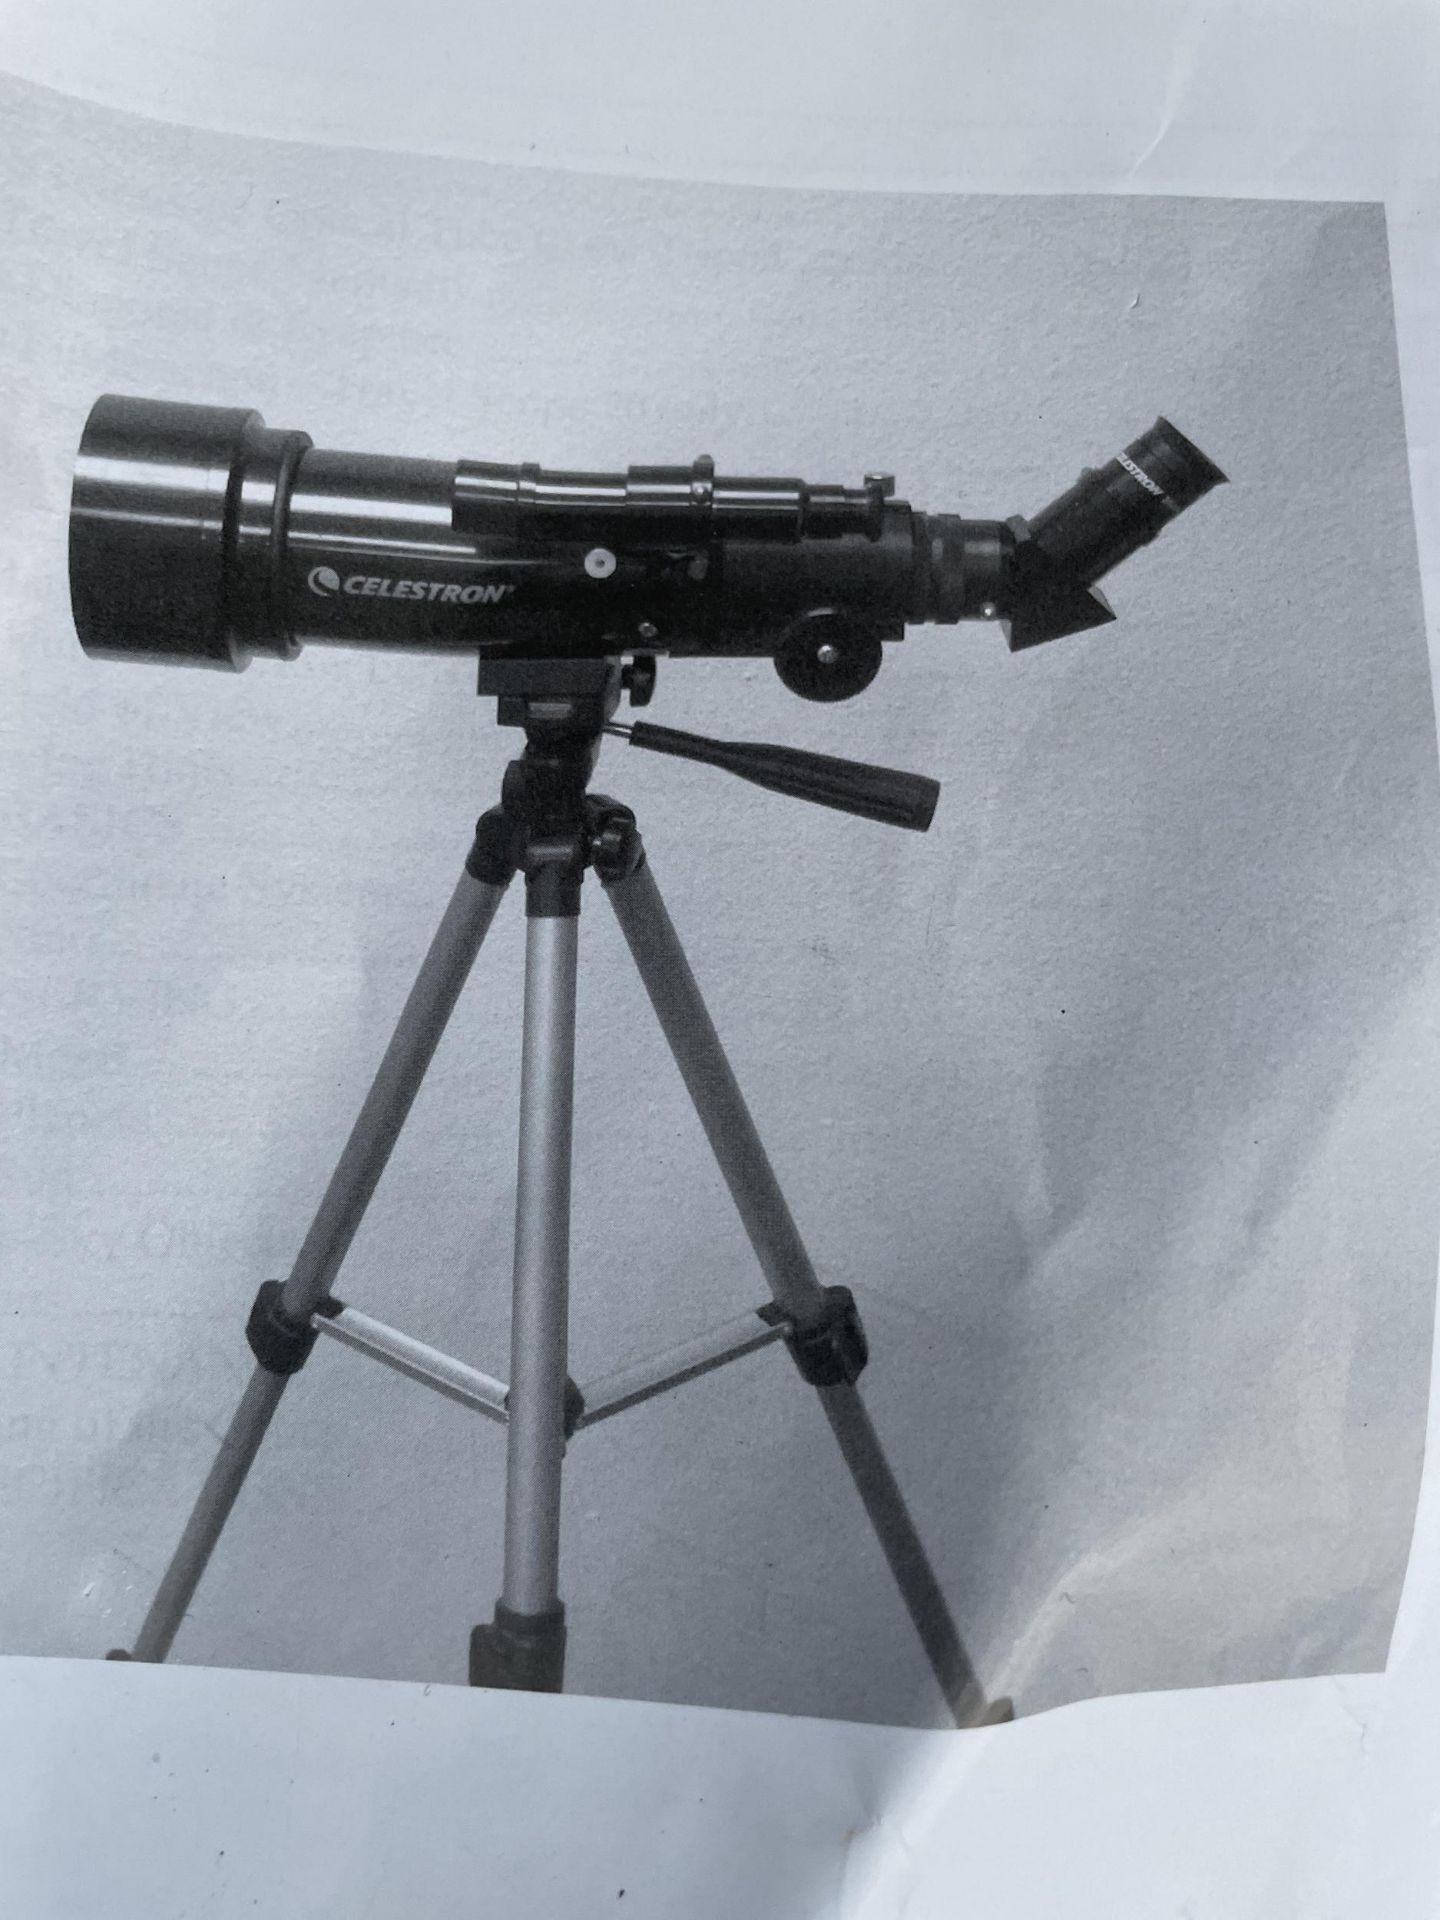 A CELESTRON TRAVEL TELESCOPE WITH CARRY BAG AND MANUAL - Image 4 of 4